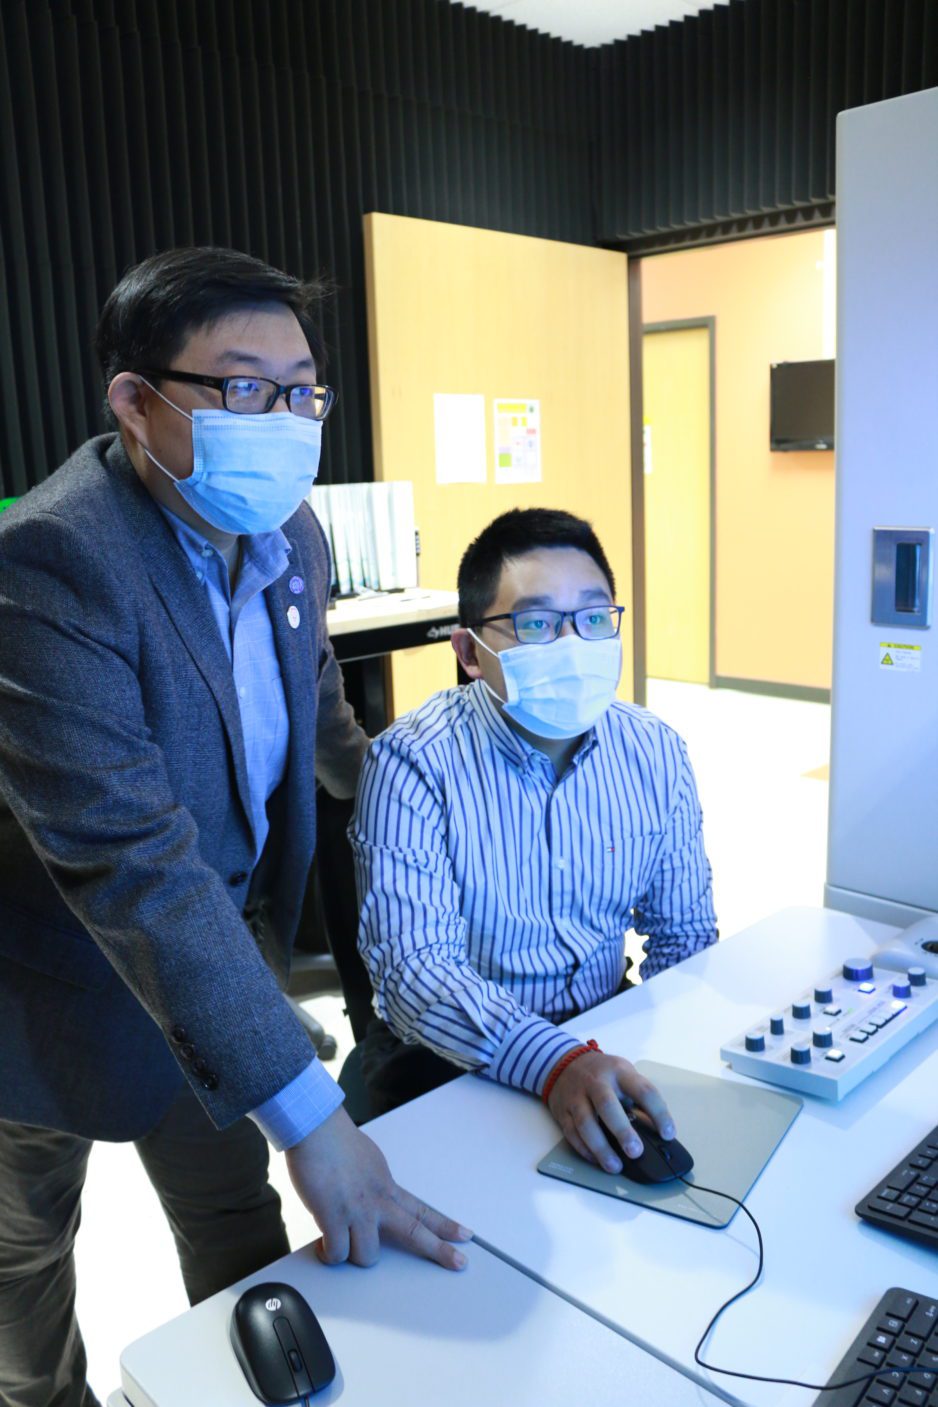 PhD student Hongkui Zheng, at right, works with faculty advisory Kai He in a microscope lab.